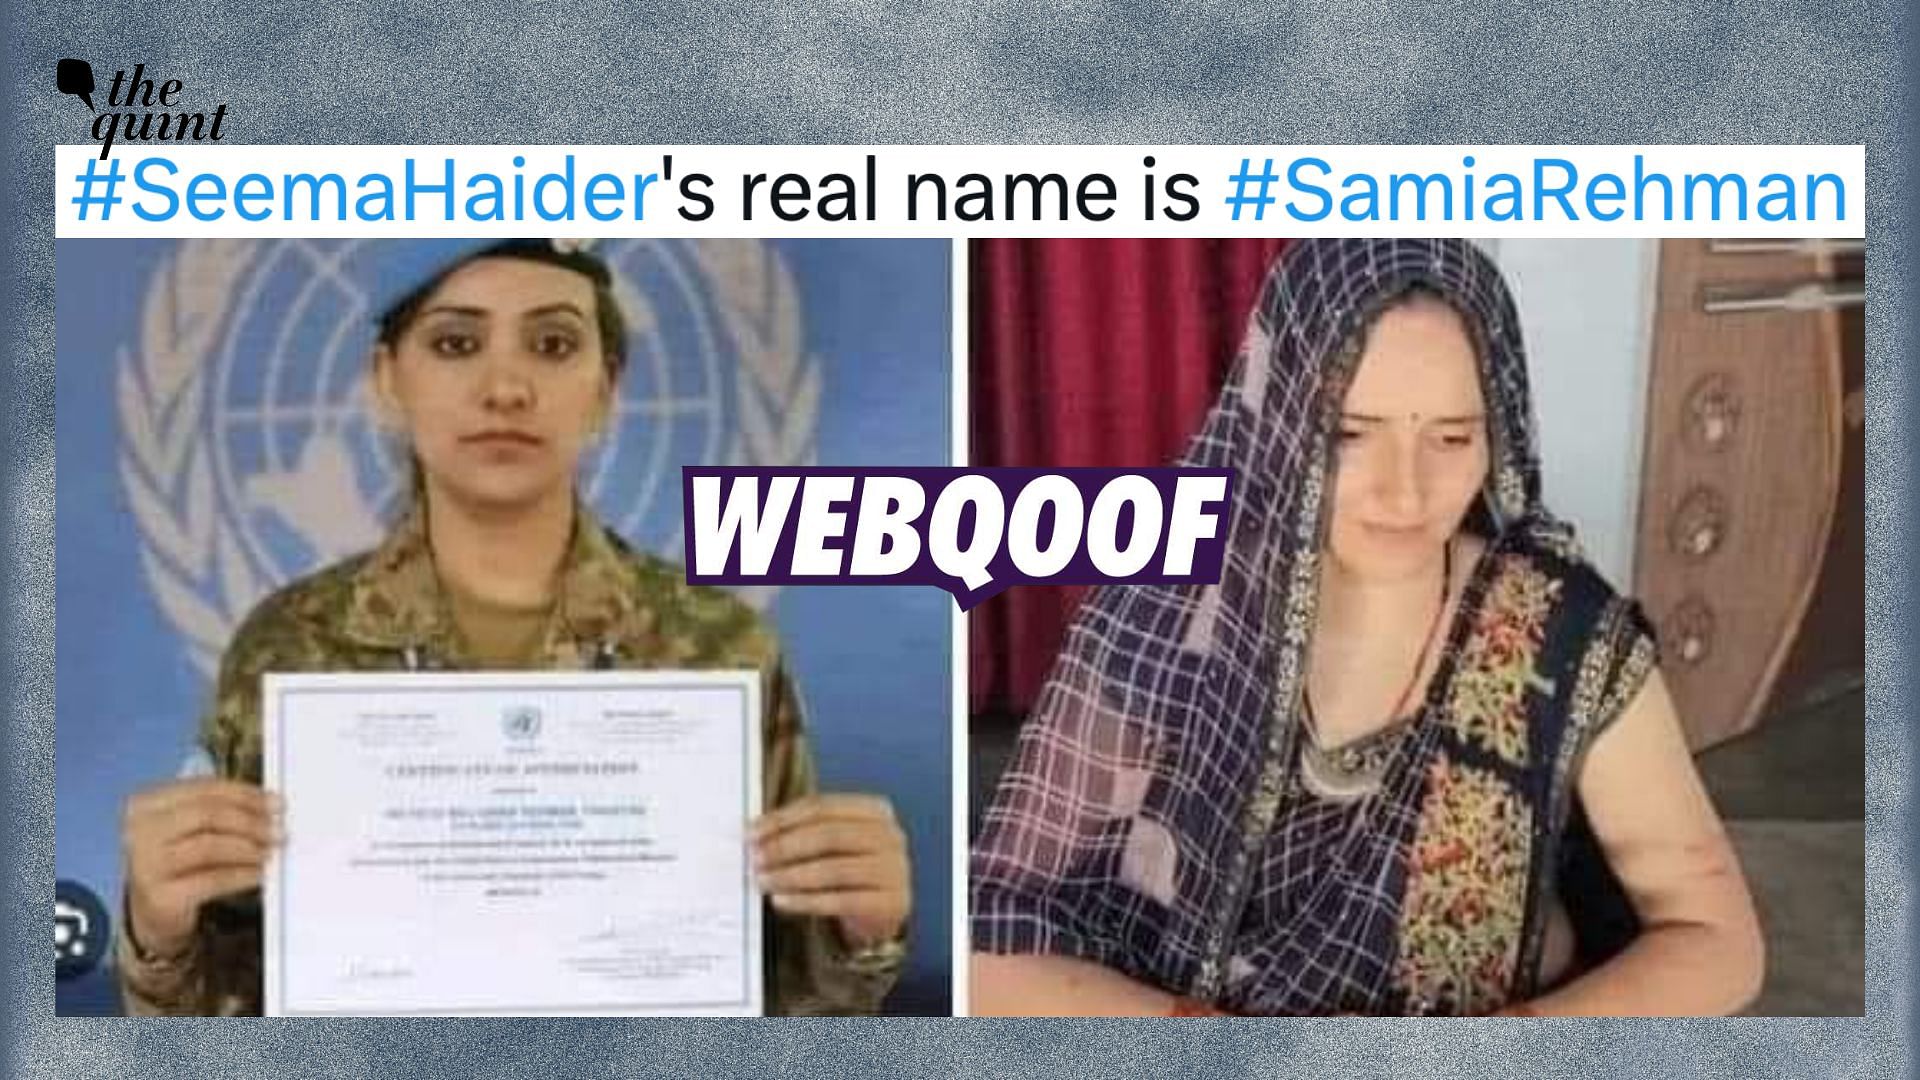 <div class="paragraphs"><p>A set of photos showing two different women is being shared to claim that Seema Haider's real name is Samia Rehman, who is a spy from Pakistan.</p></div>